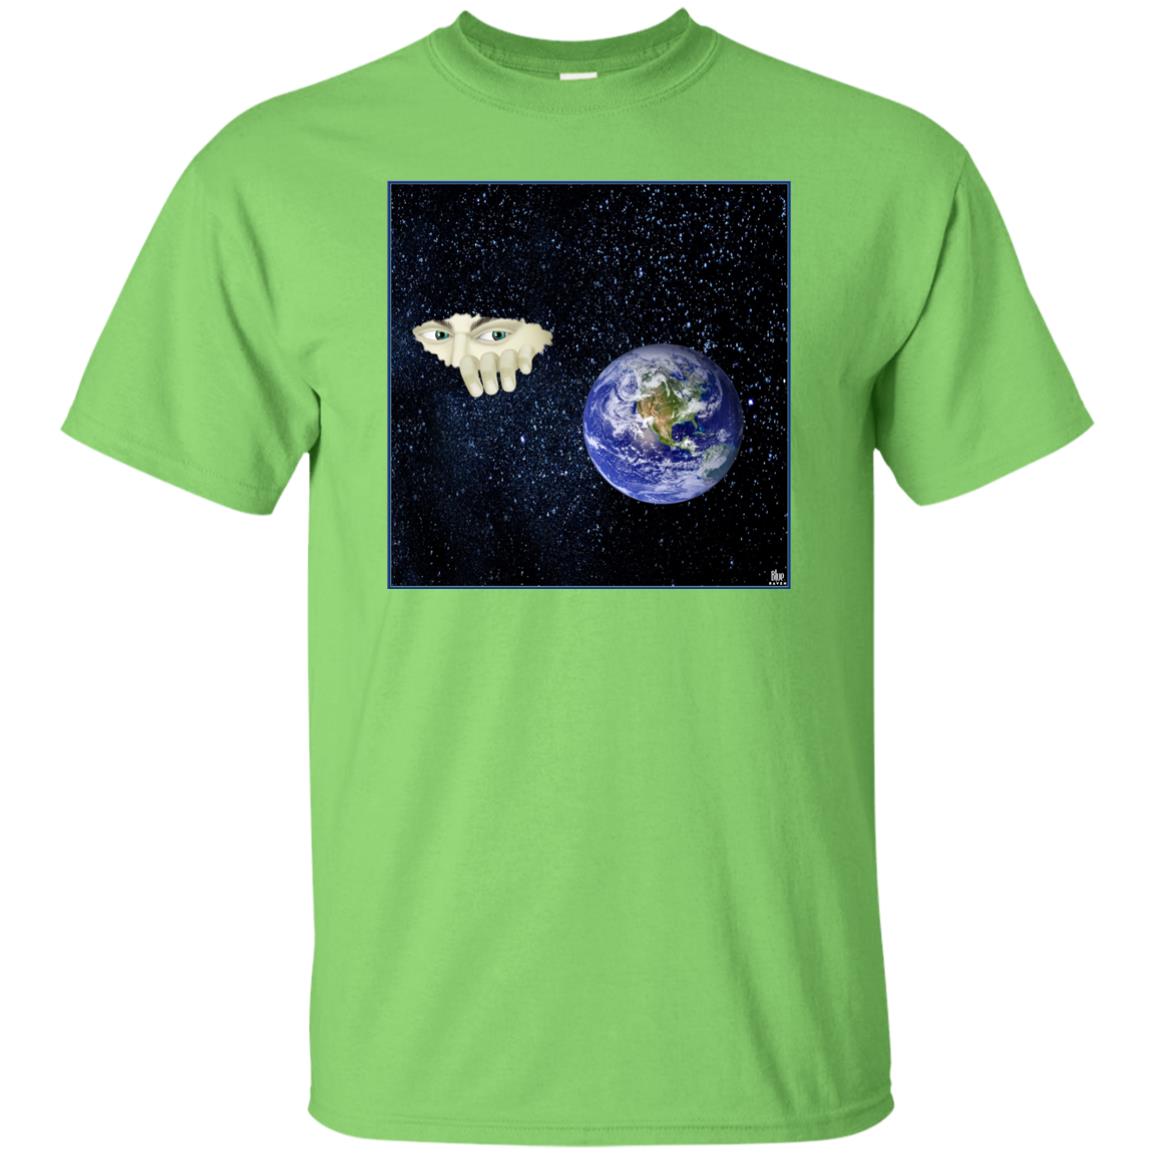 SOMEWHERE OUT THERE - Men's Classic Fit T-Shirt